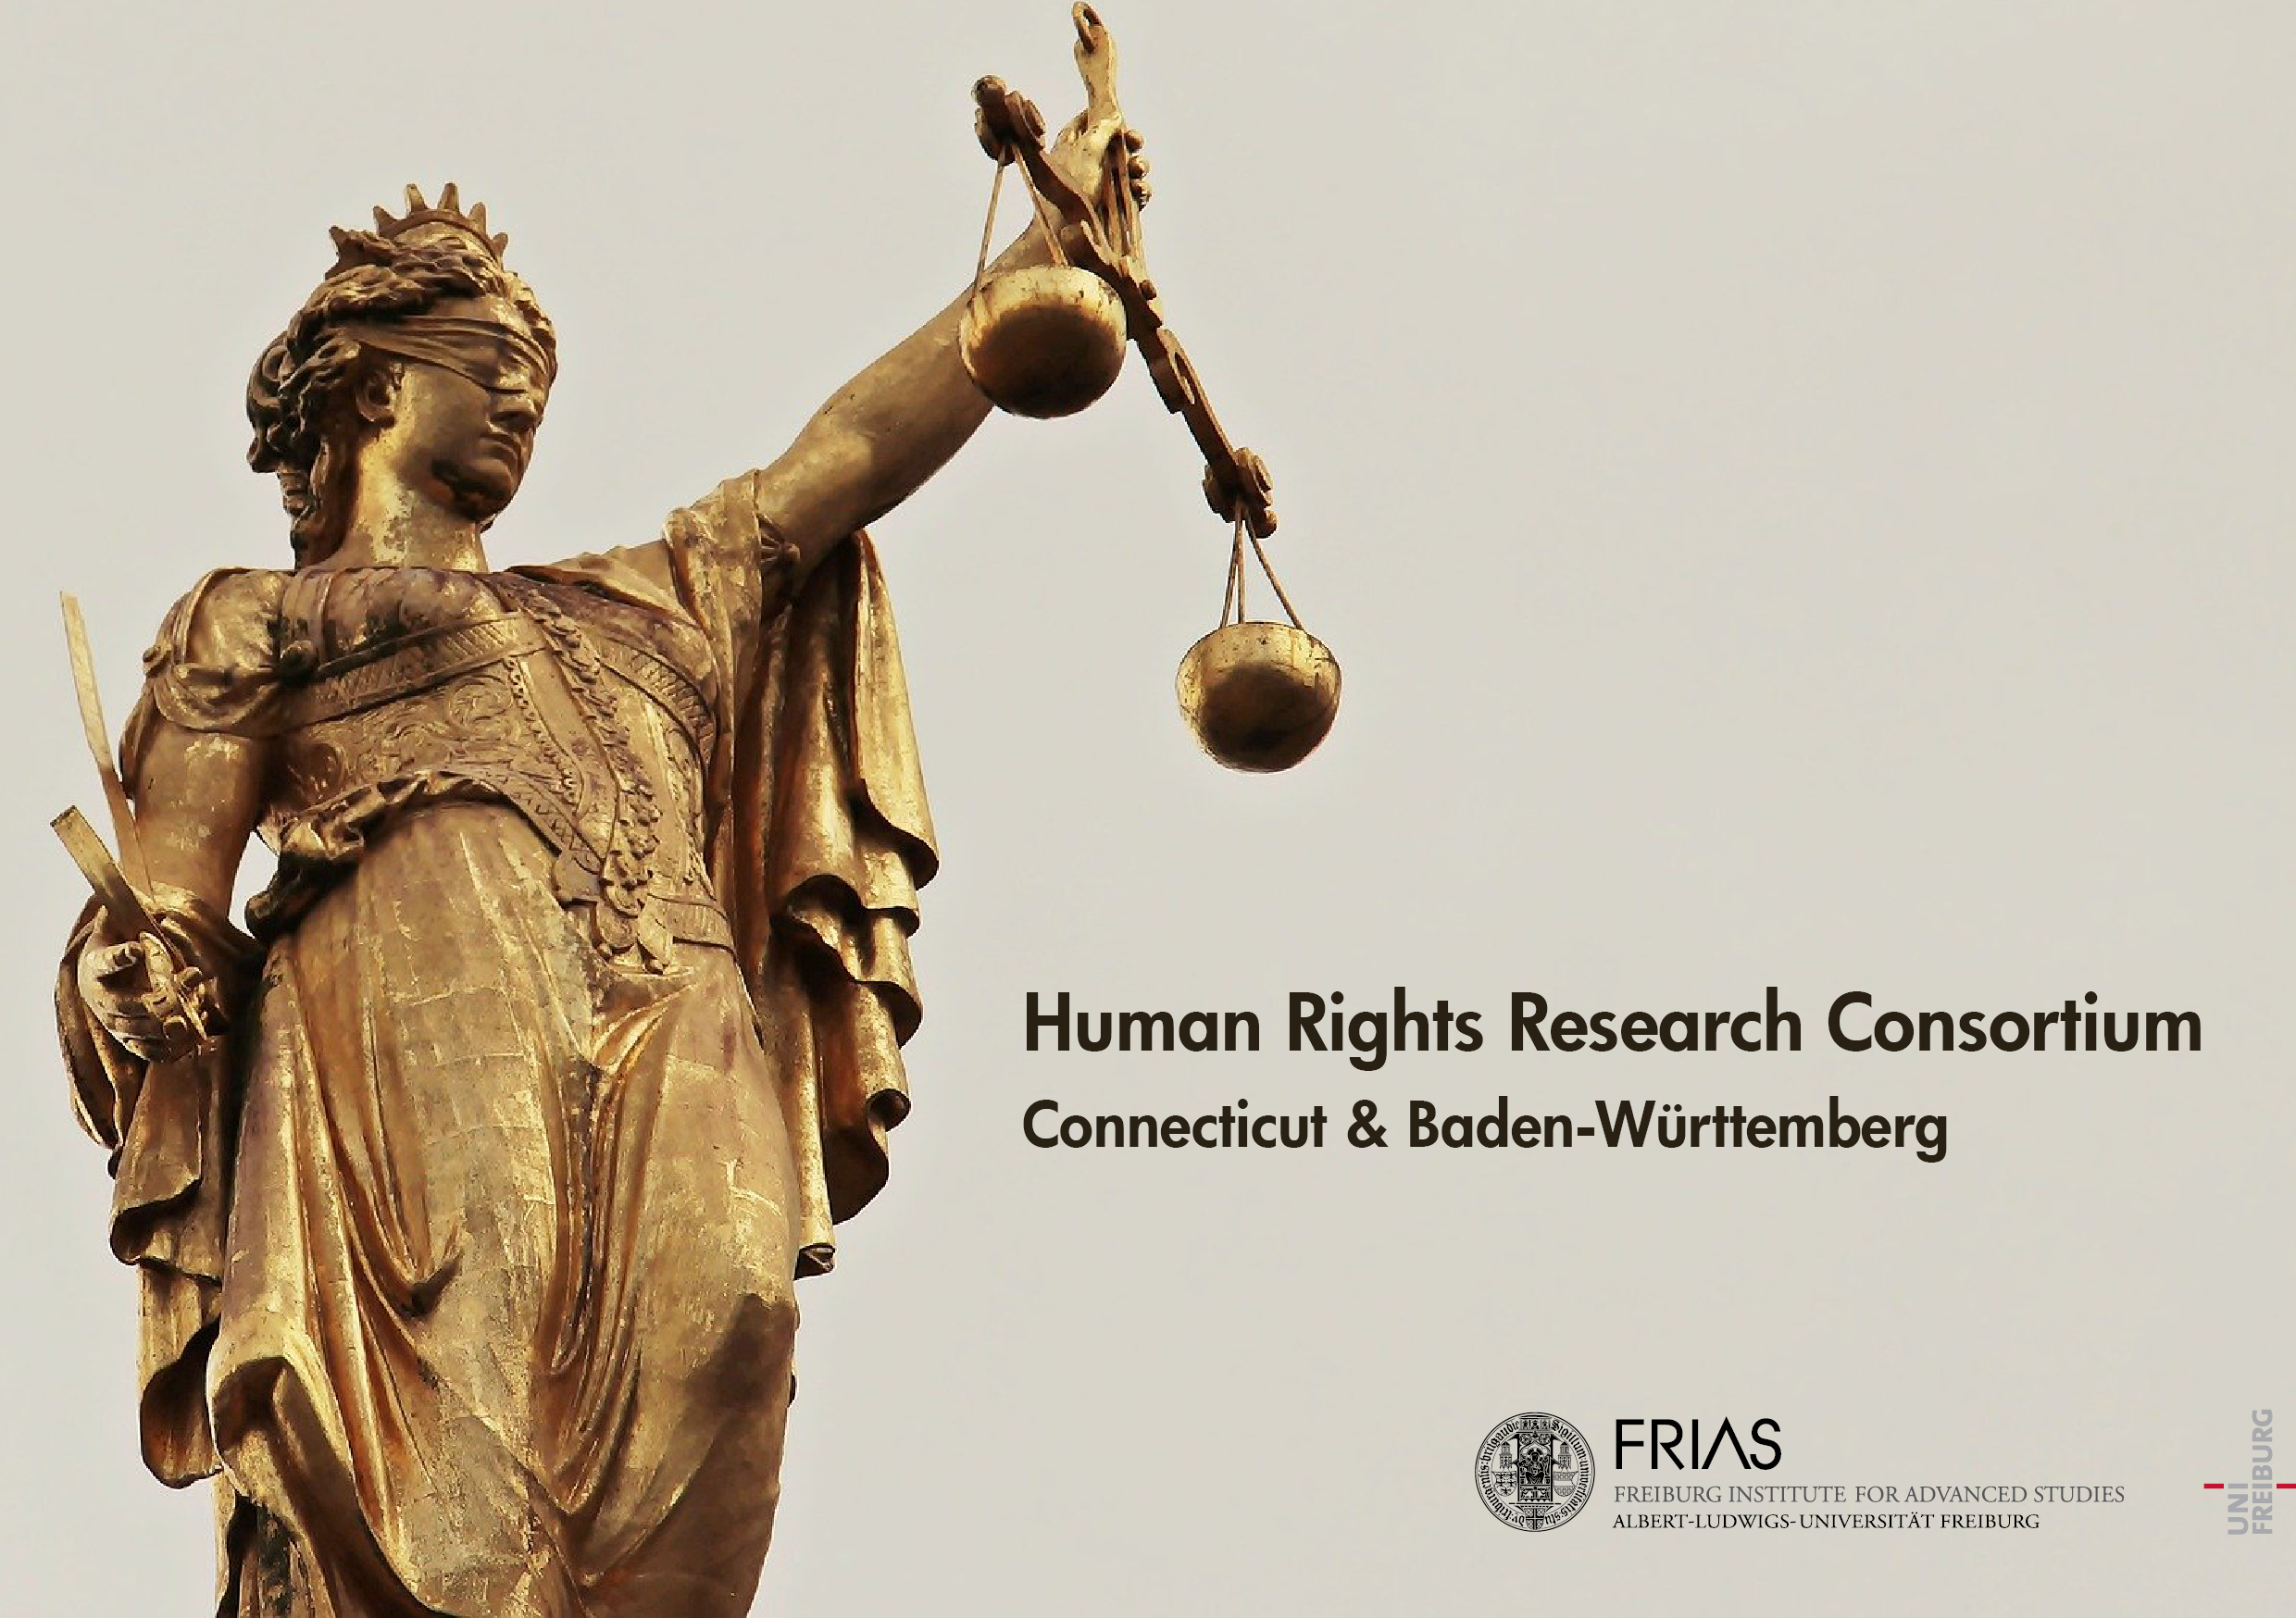 Human Rights: an area of ever-growing importance